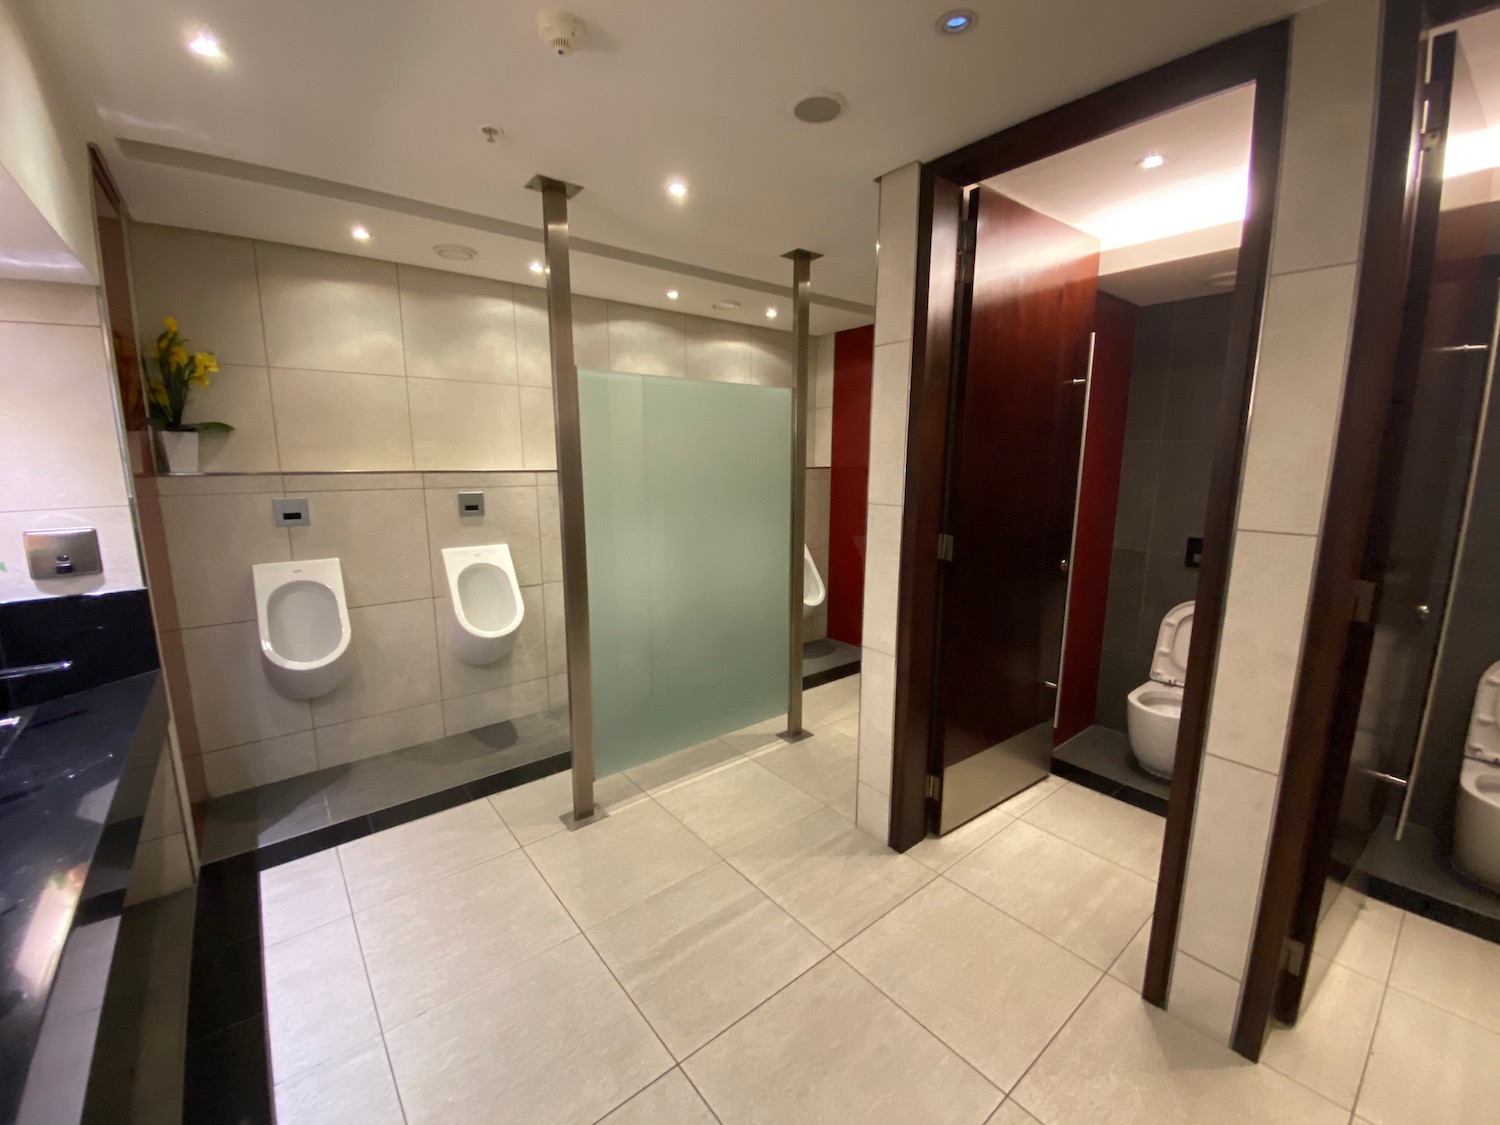 a bathroom with urinals and two urinals